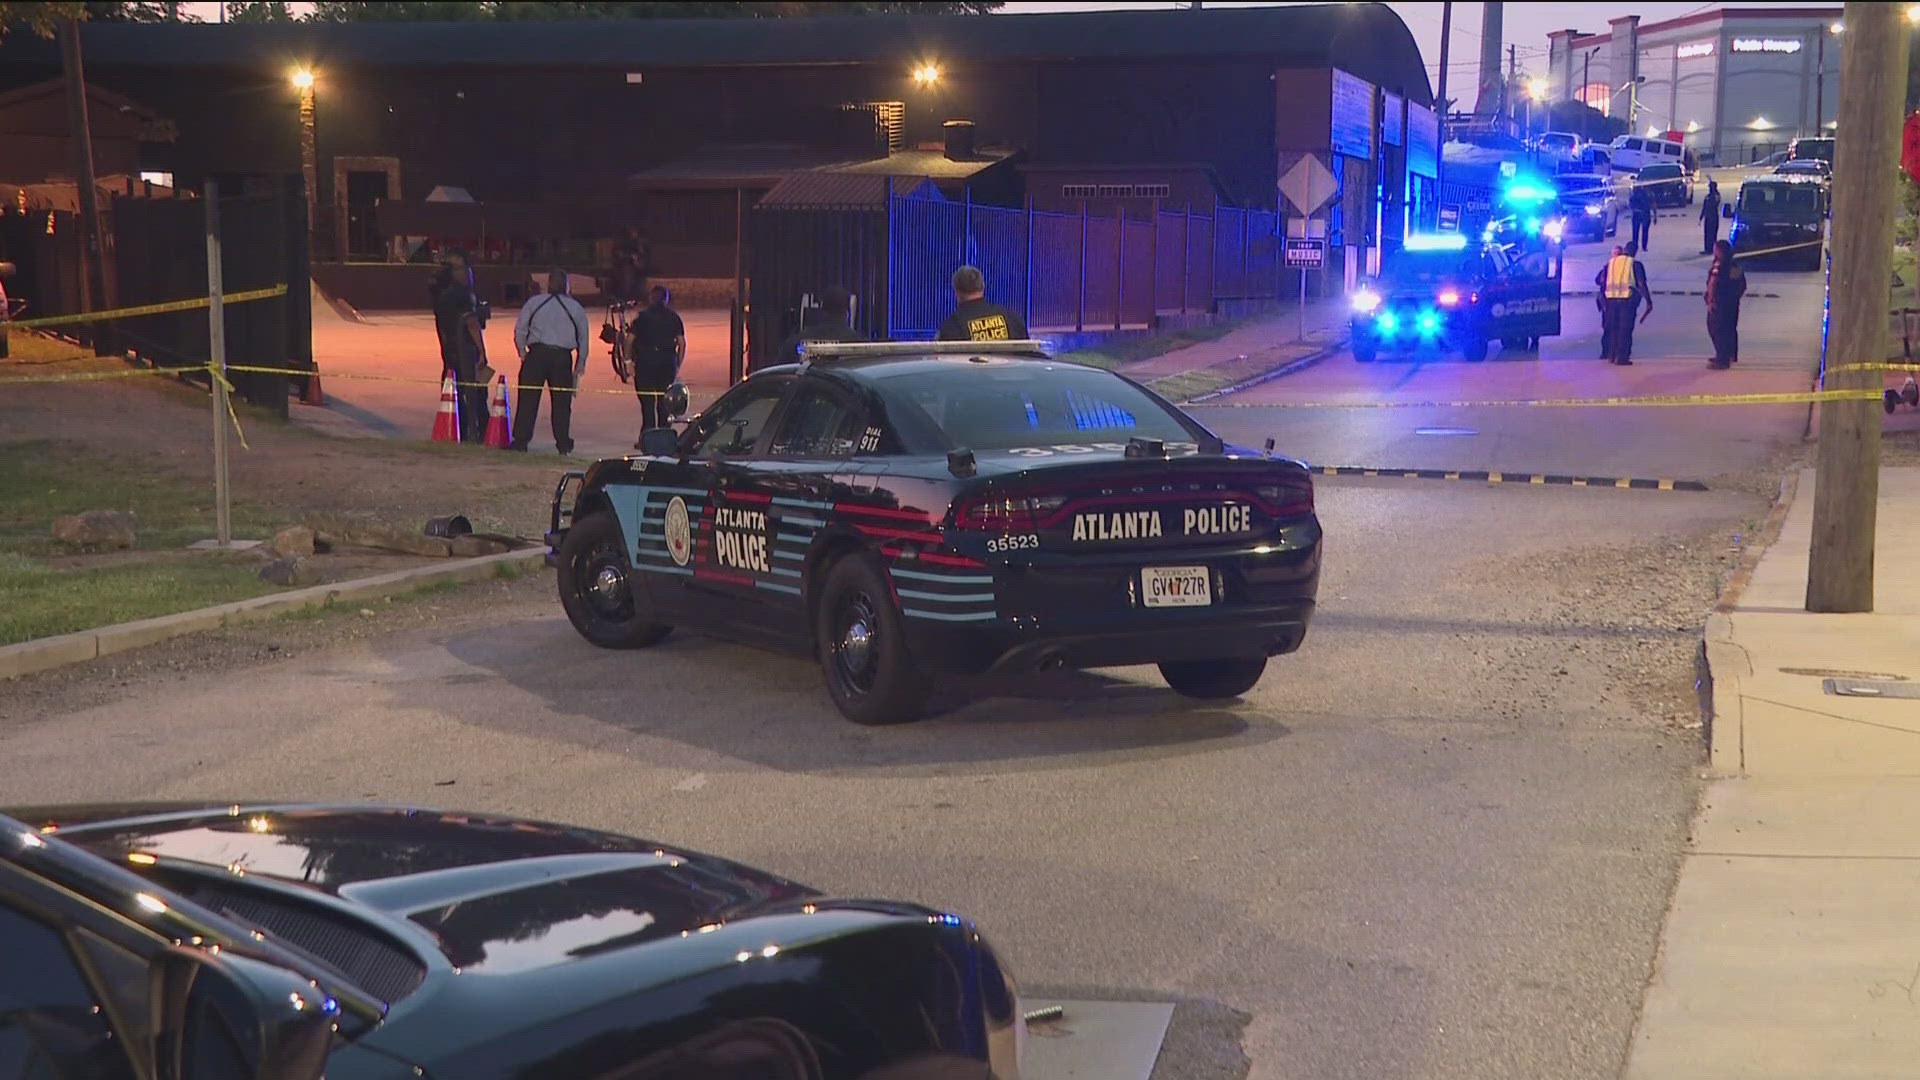 According to the Atlanta Police Department, a person was shot and deceased around the 600 block of Travis Street NW.